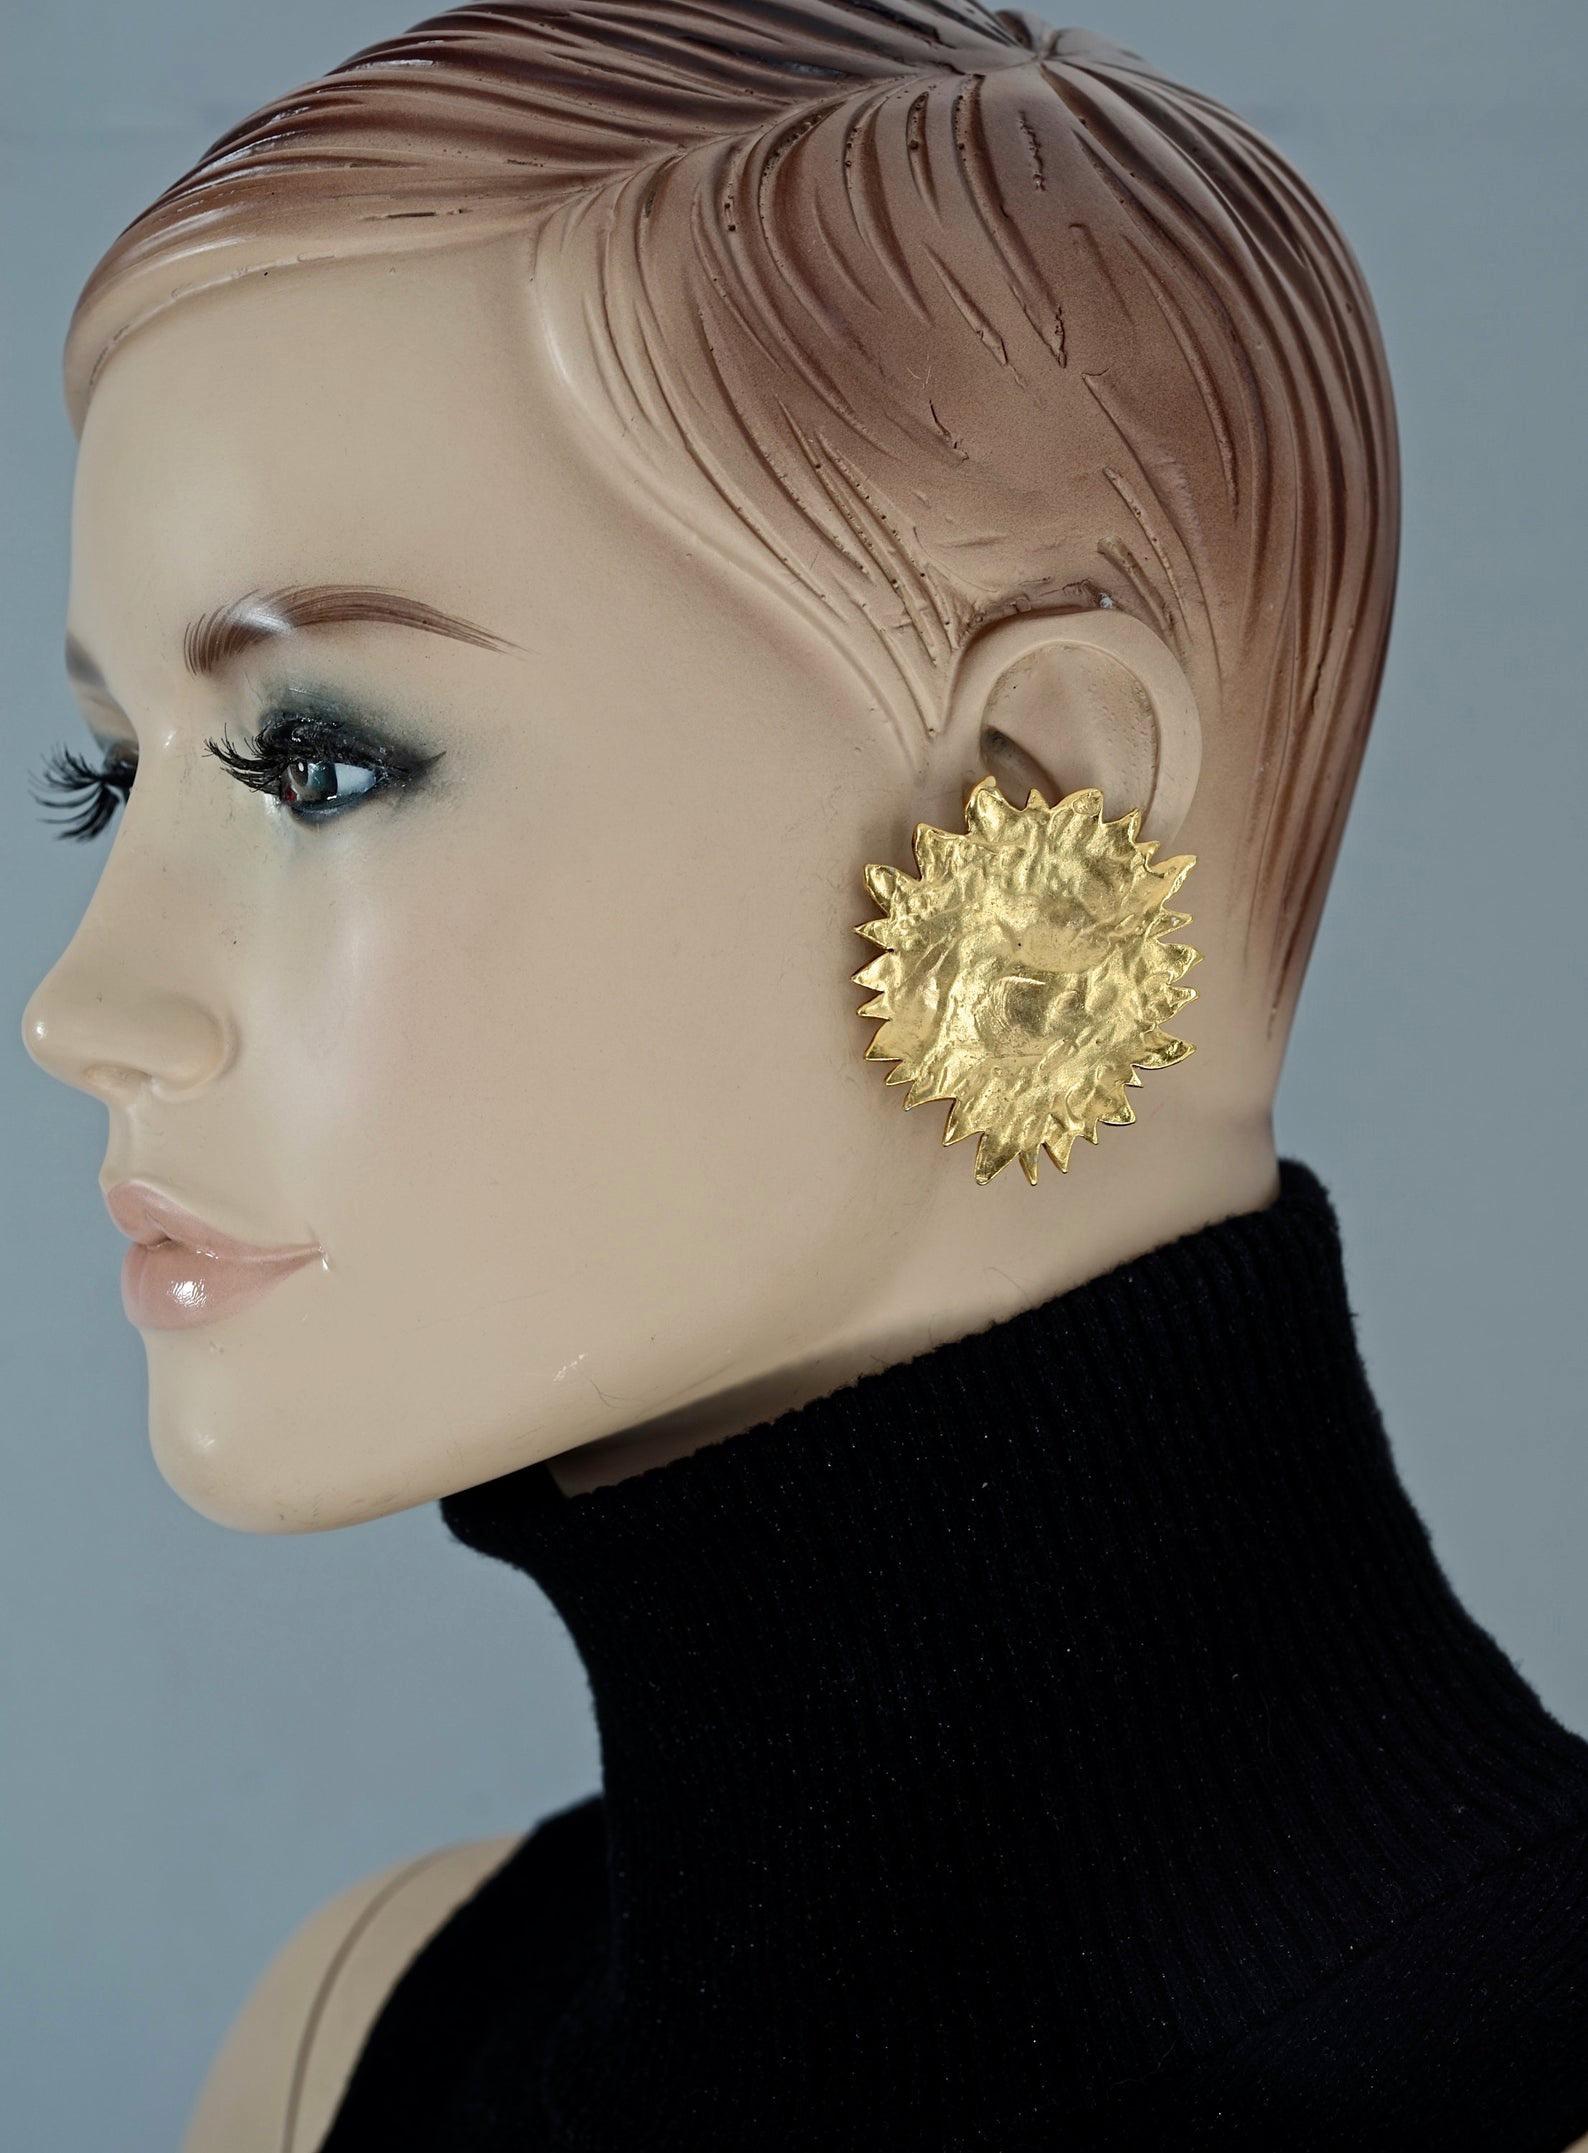 Vintage Massive YVES SAINT LAURENT Ysl by Robert Goossens Textured Sun Earrings

Measurements:
Height: 2.04 inches (5.2 cm)
Width: 1.89 inches (4.8 cm)
Weight per Earring: 16 grams

Features:
- 100% Authentic YVES SAINT LAURENT by Robert Goossens.
-